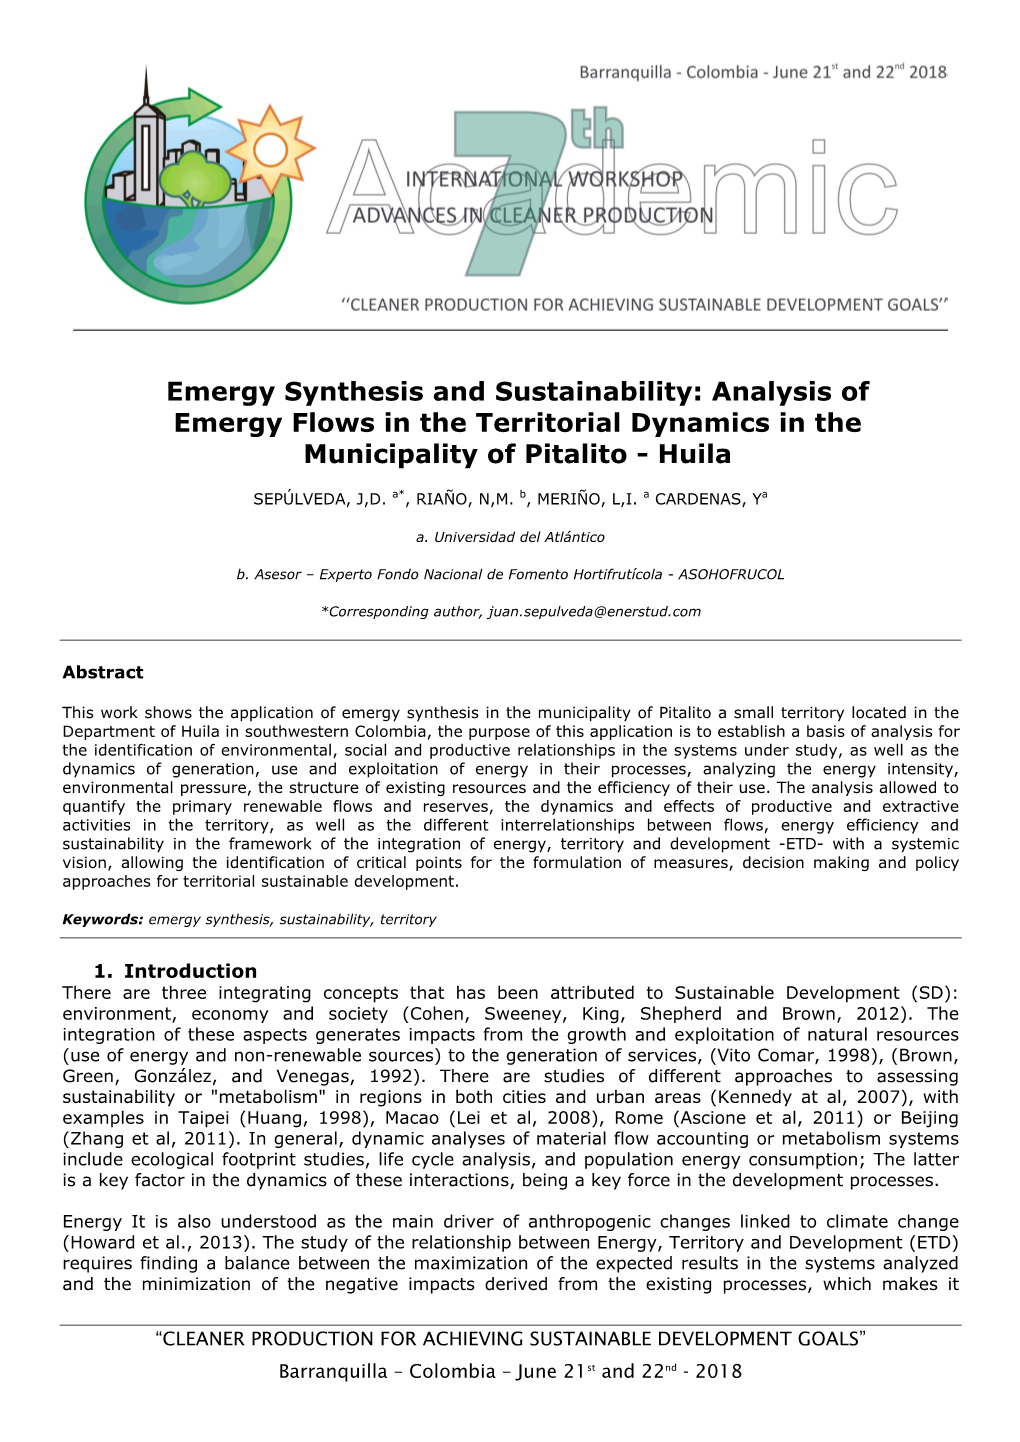 Emergy Synthesis and Sustainability: Analysis of Emergy Flows in the Territorial Dynamics in the Municipality of Pitalito - Huila